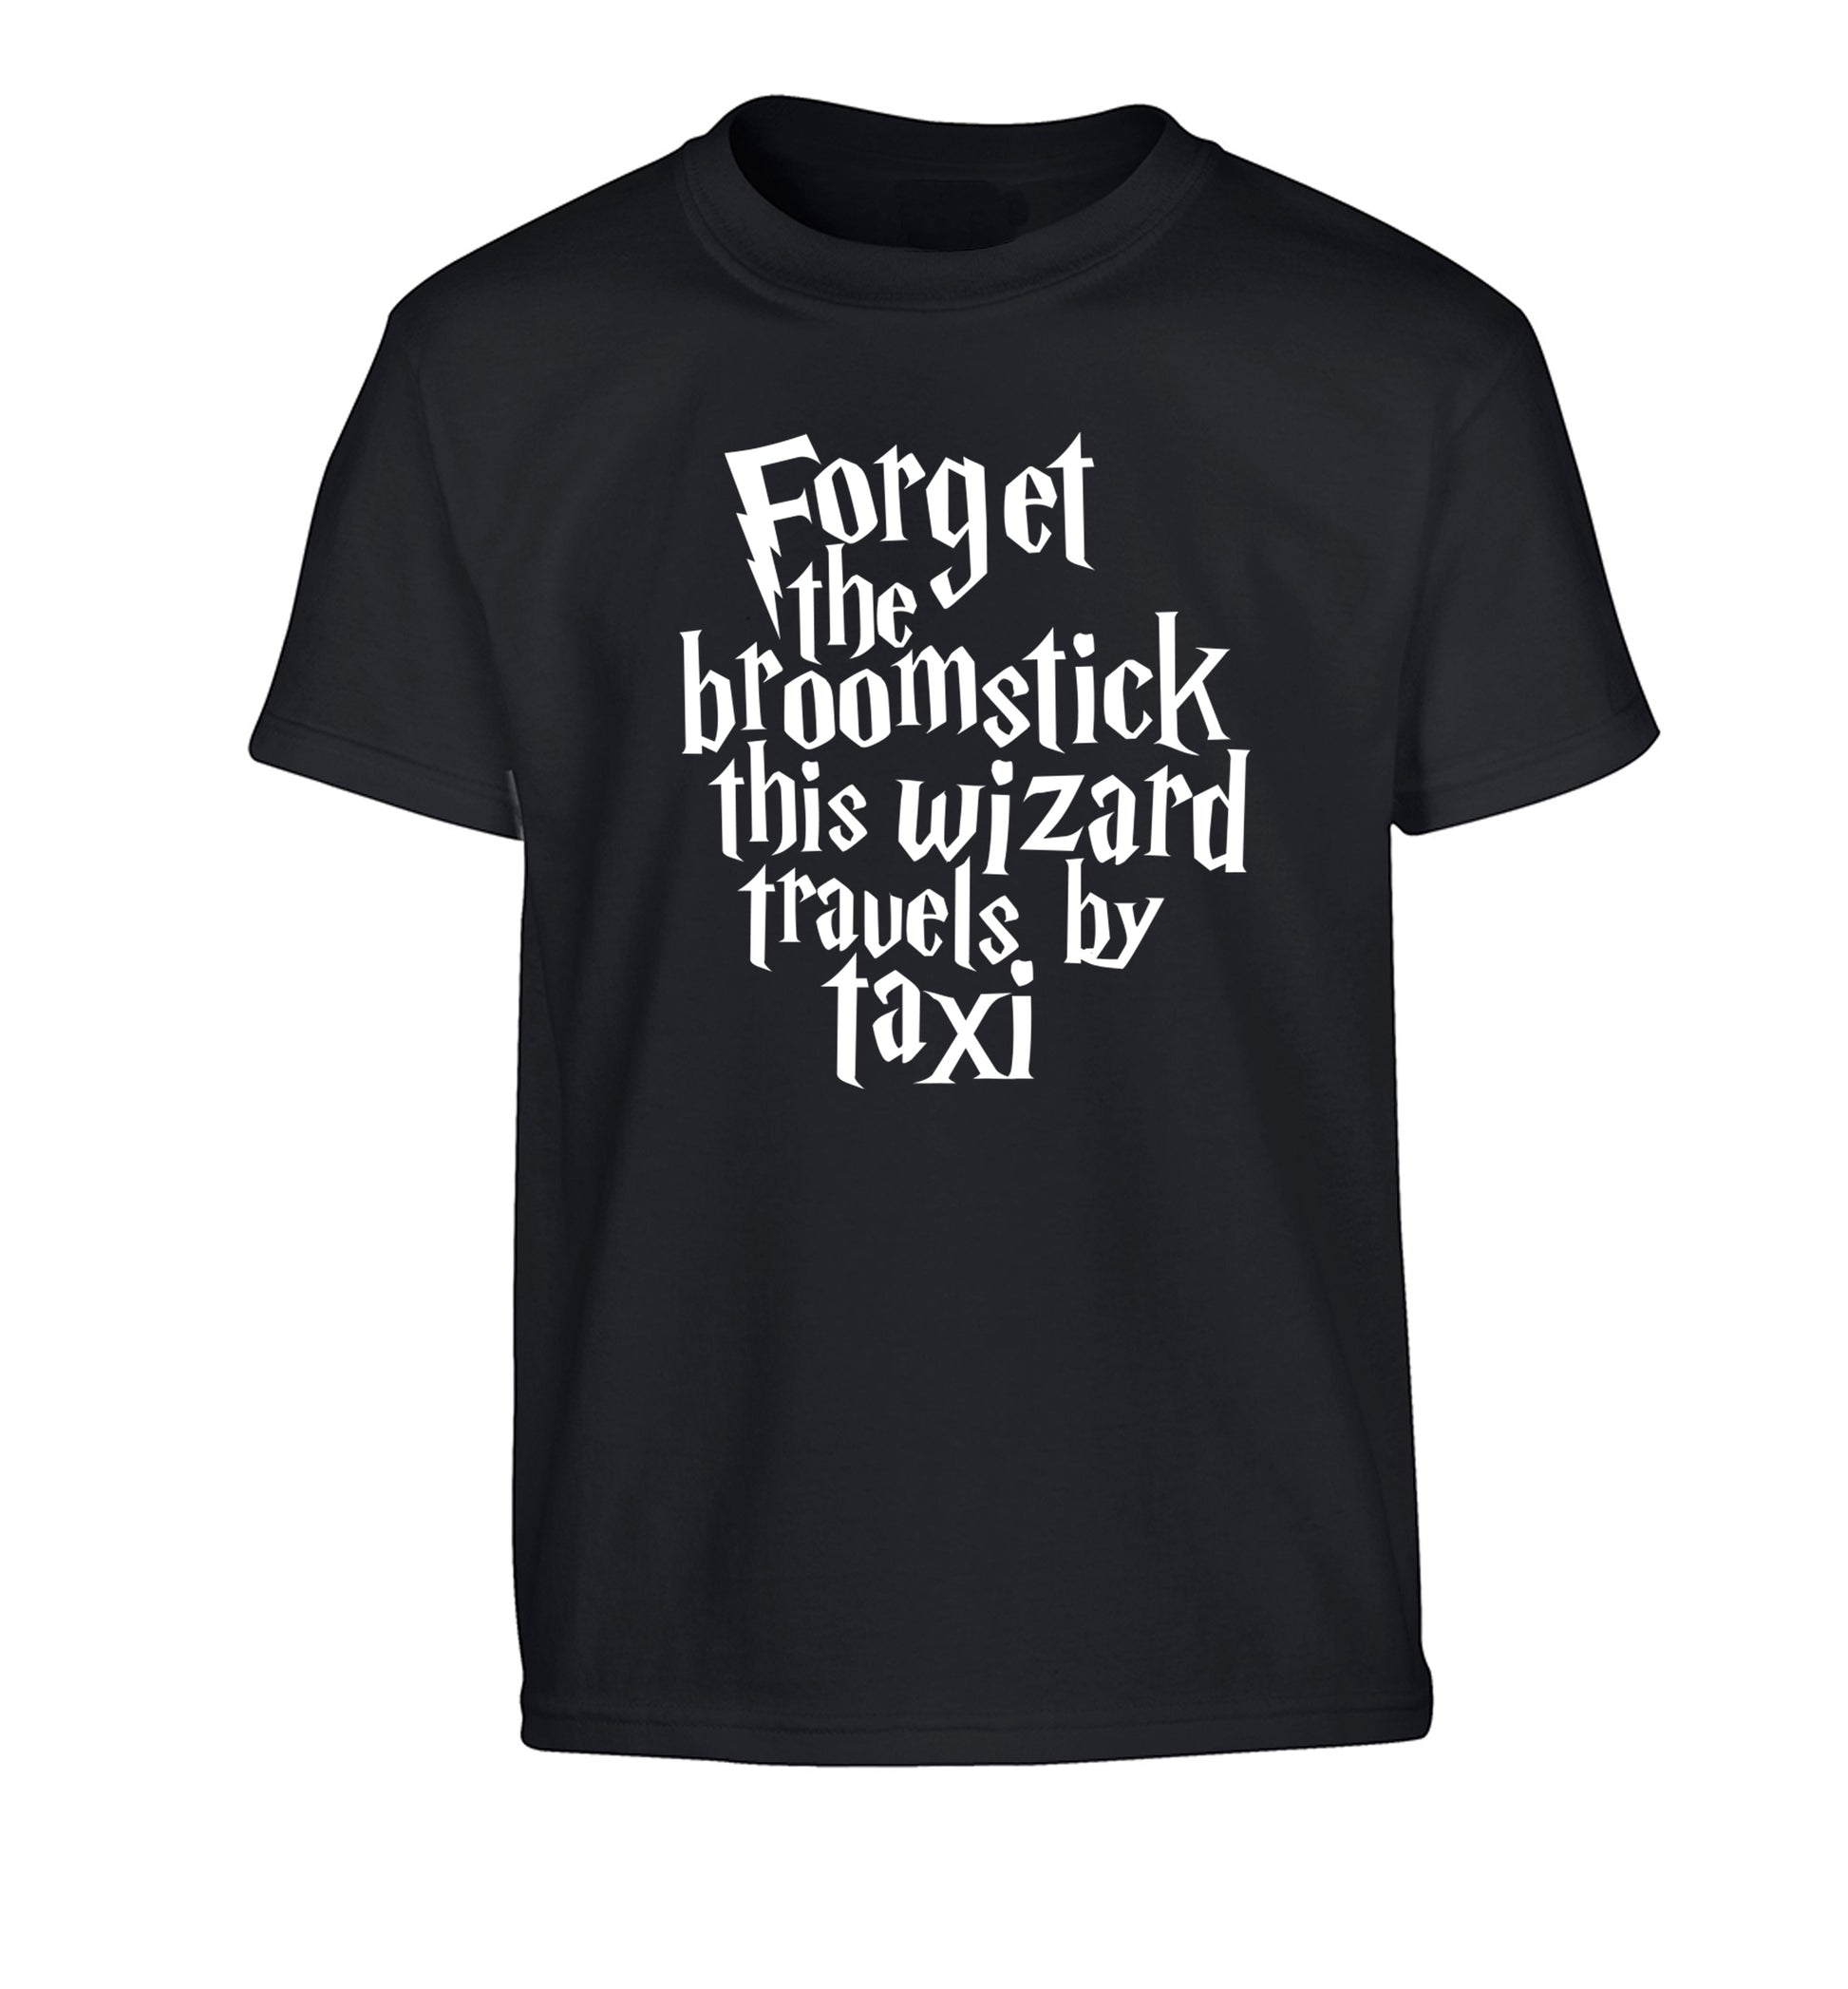 Forget the broomstick this wizard travels by taxi Children's black Tshirt 12-14 Years